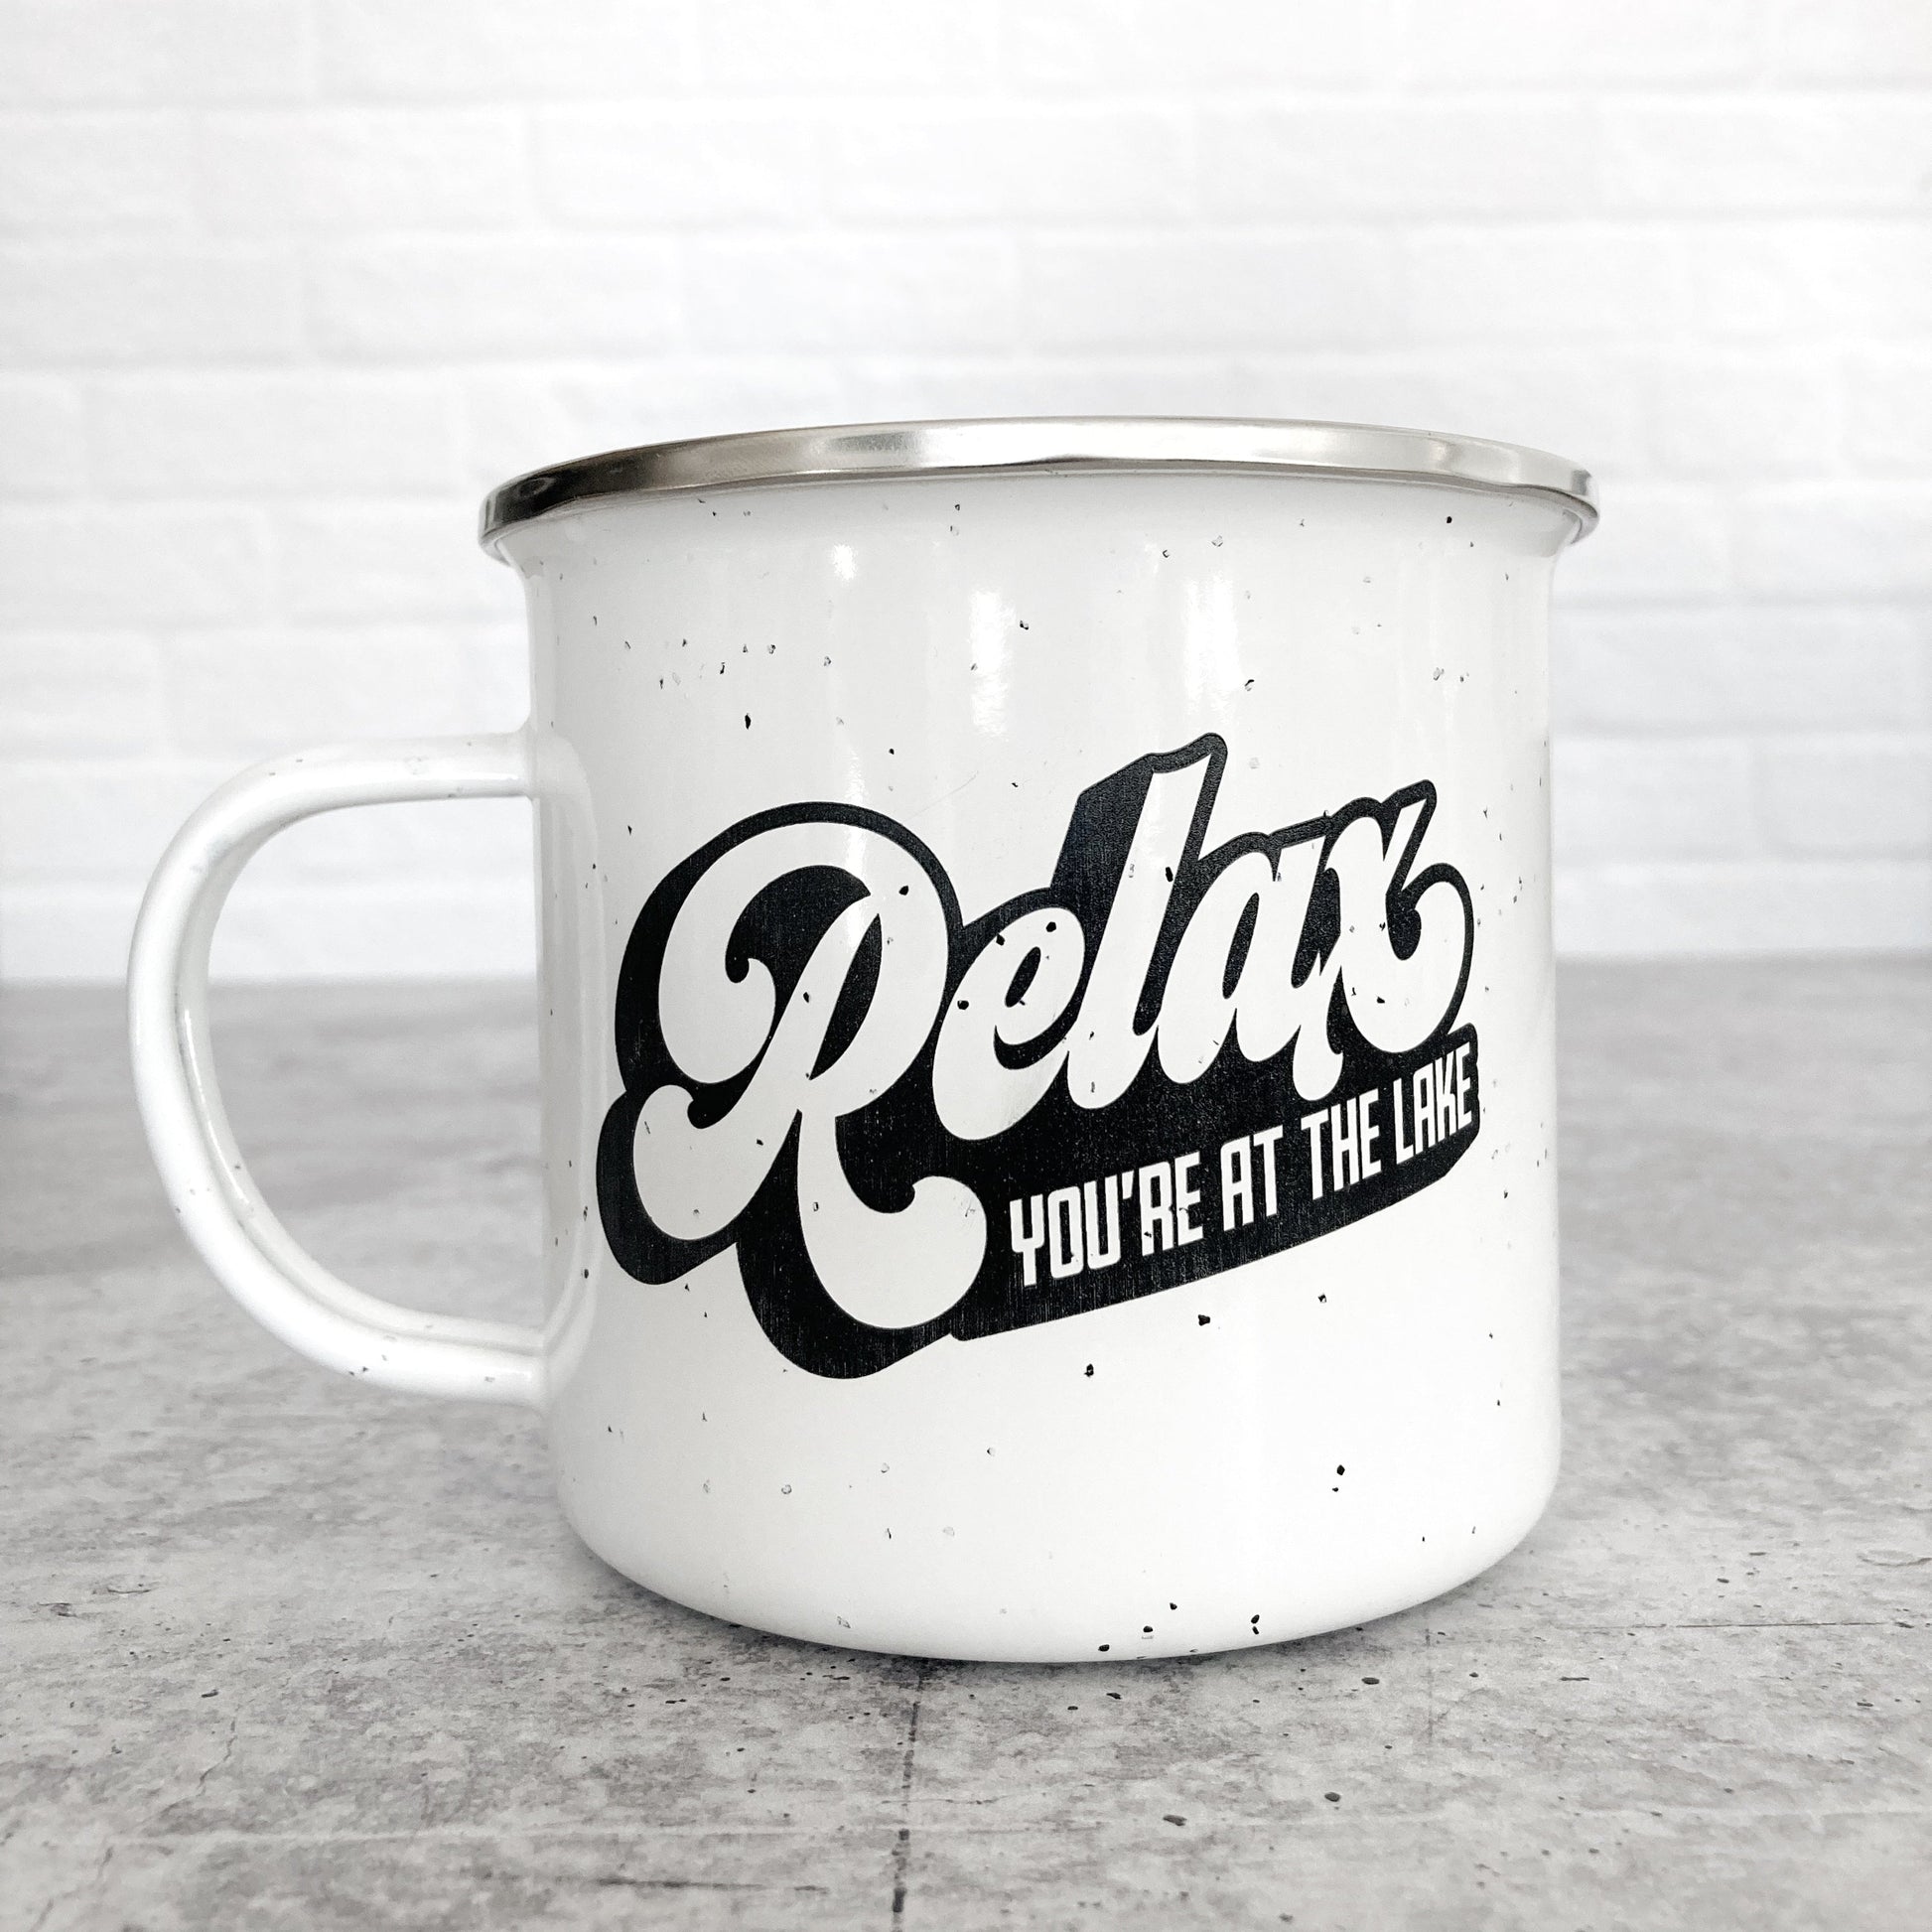 Relax You're At The Lake design on a white enamel mug